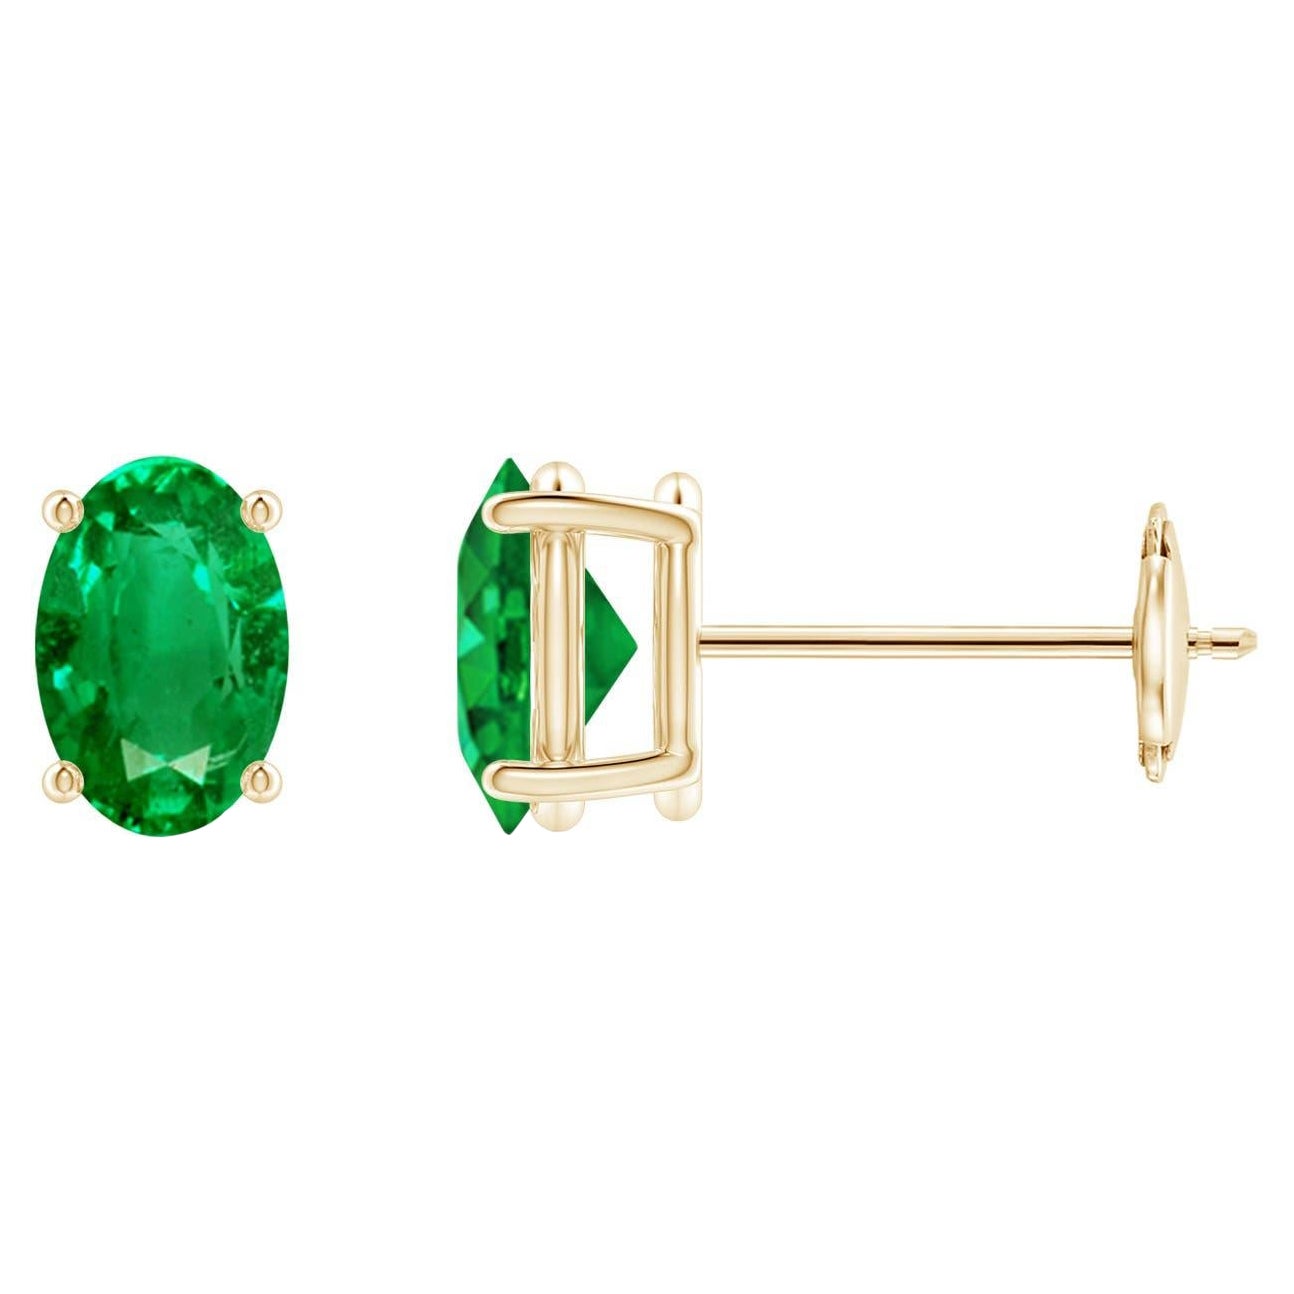 Natural Solitaire Oval 0.80ct Emerald Stud Earrings in 14K Yellow Gold